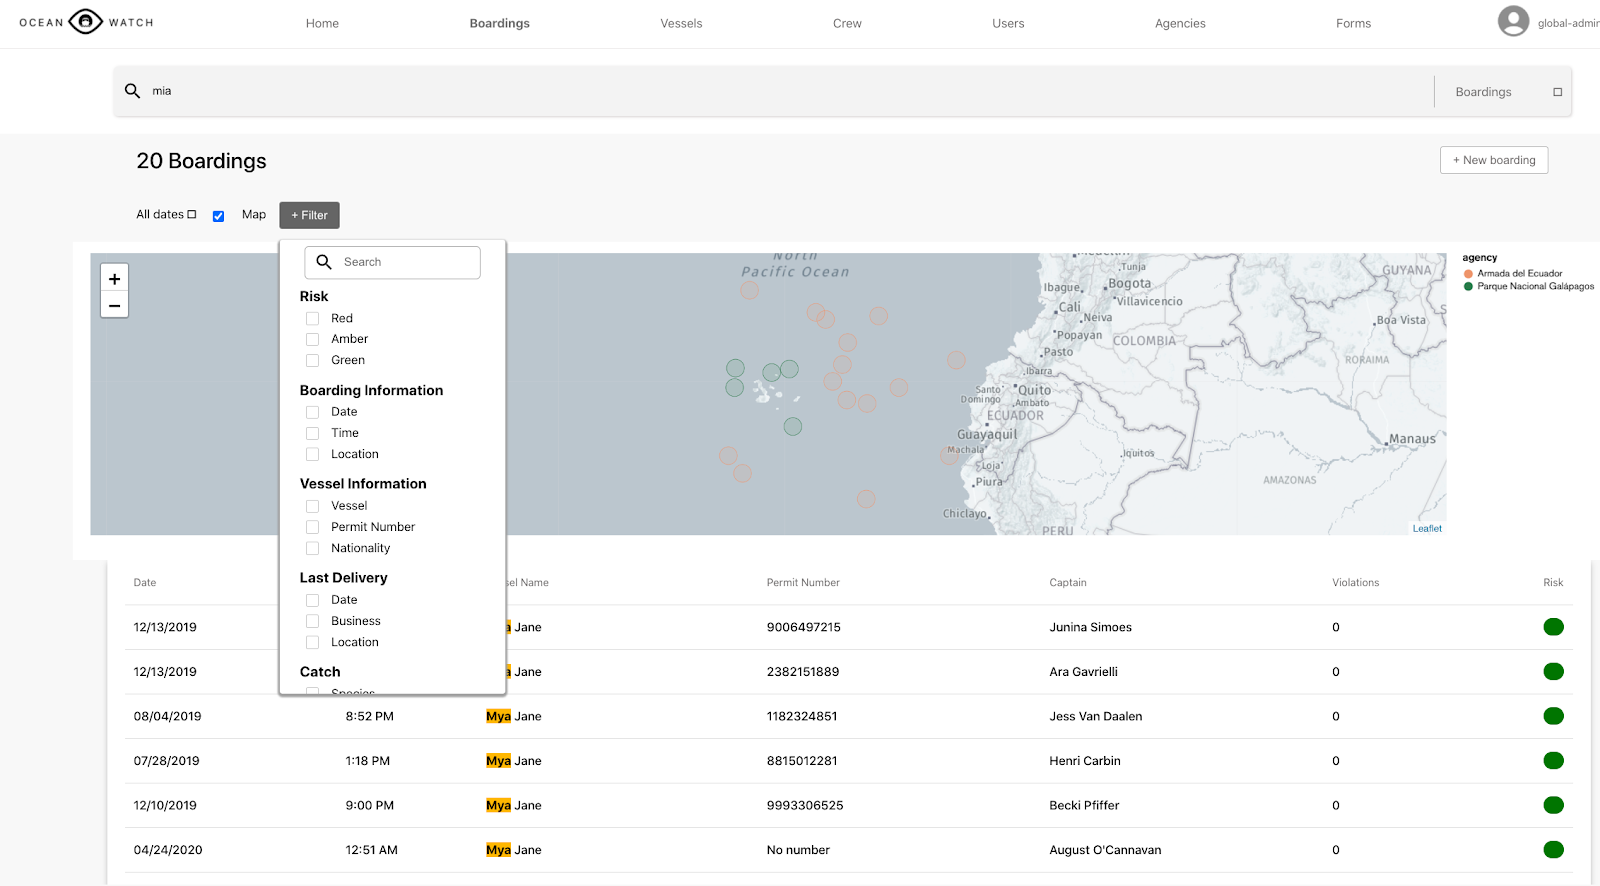 See Atlas Search in action with the WildAid application for marine conservation